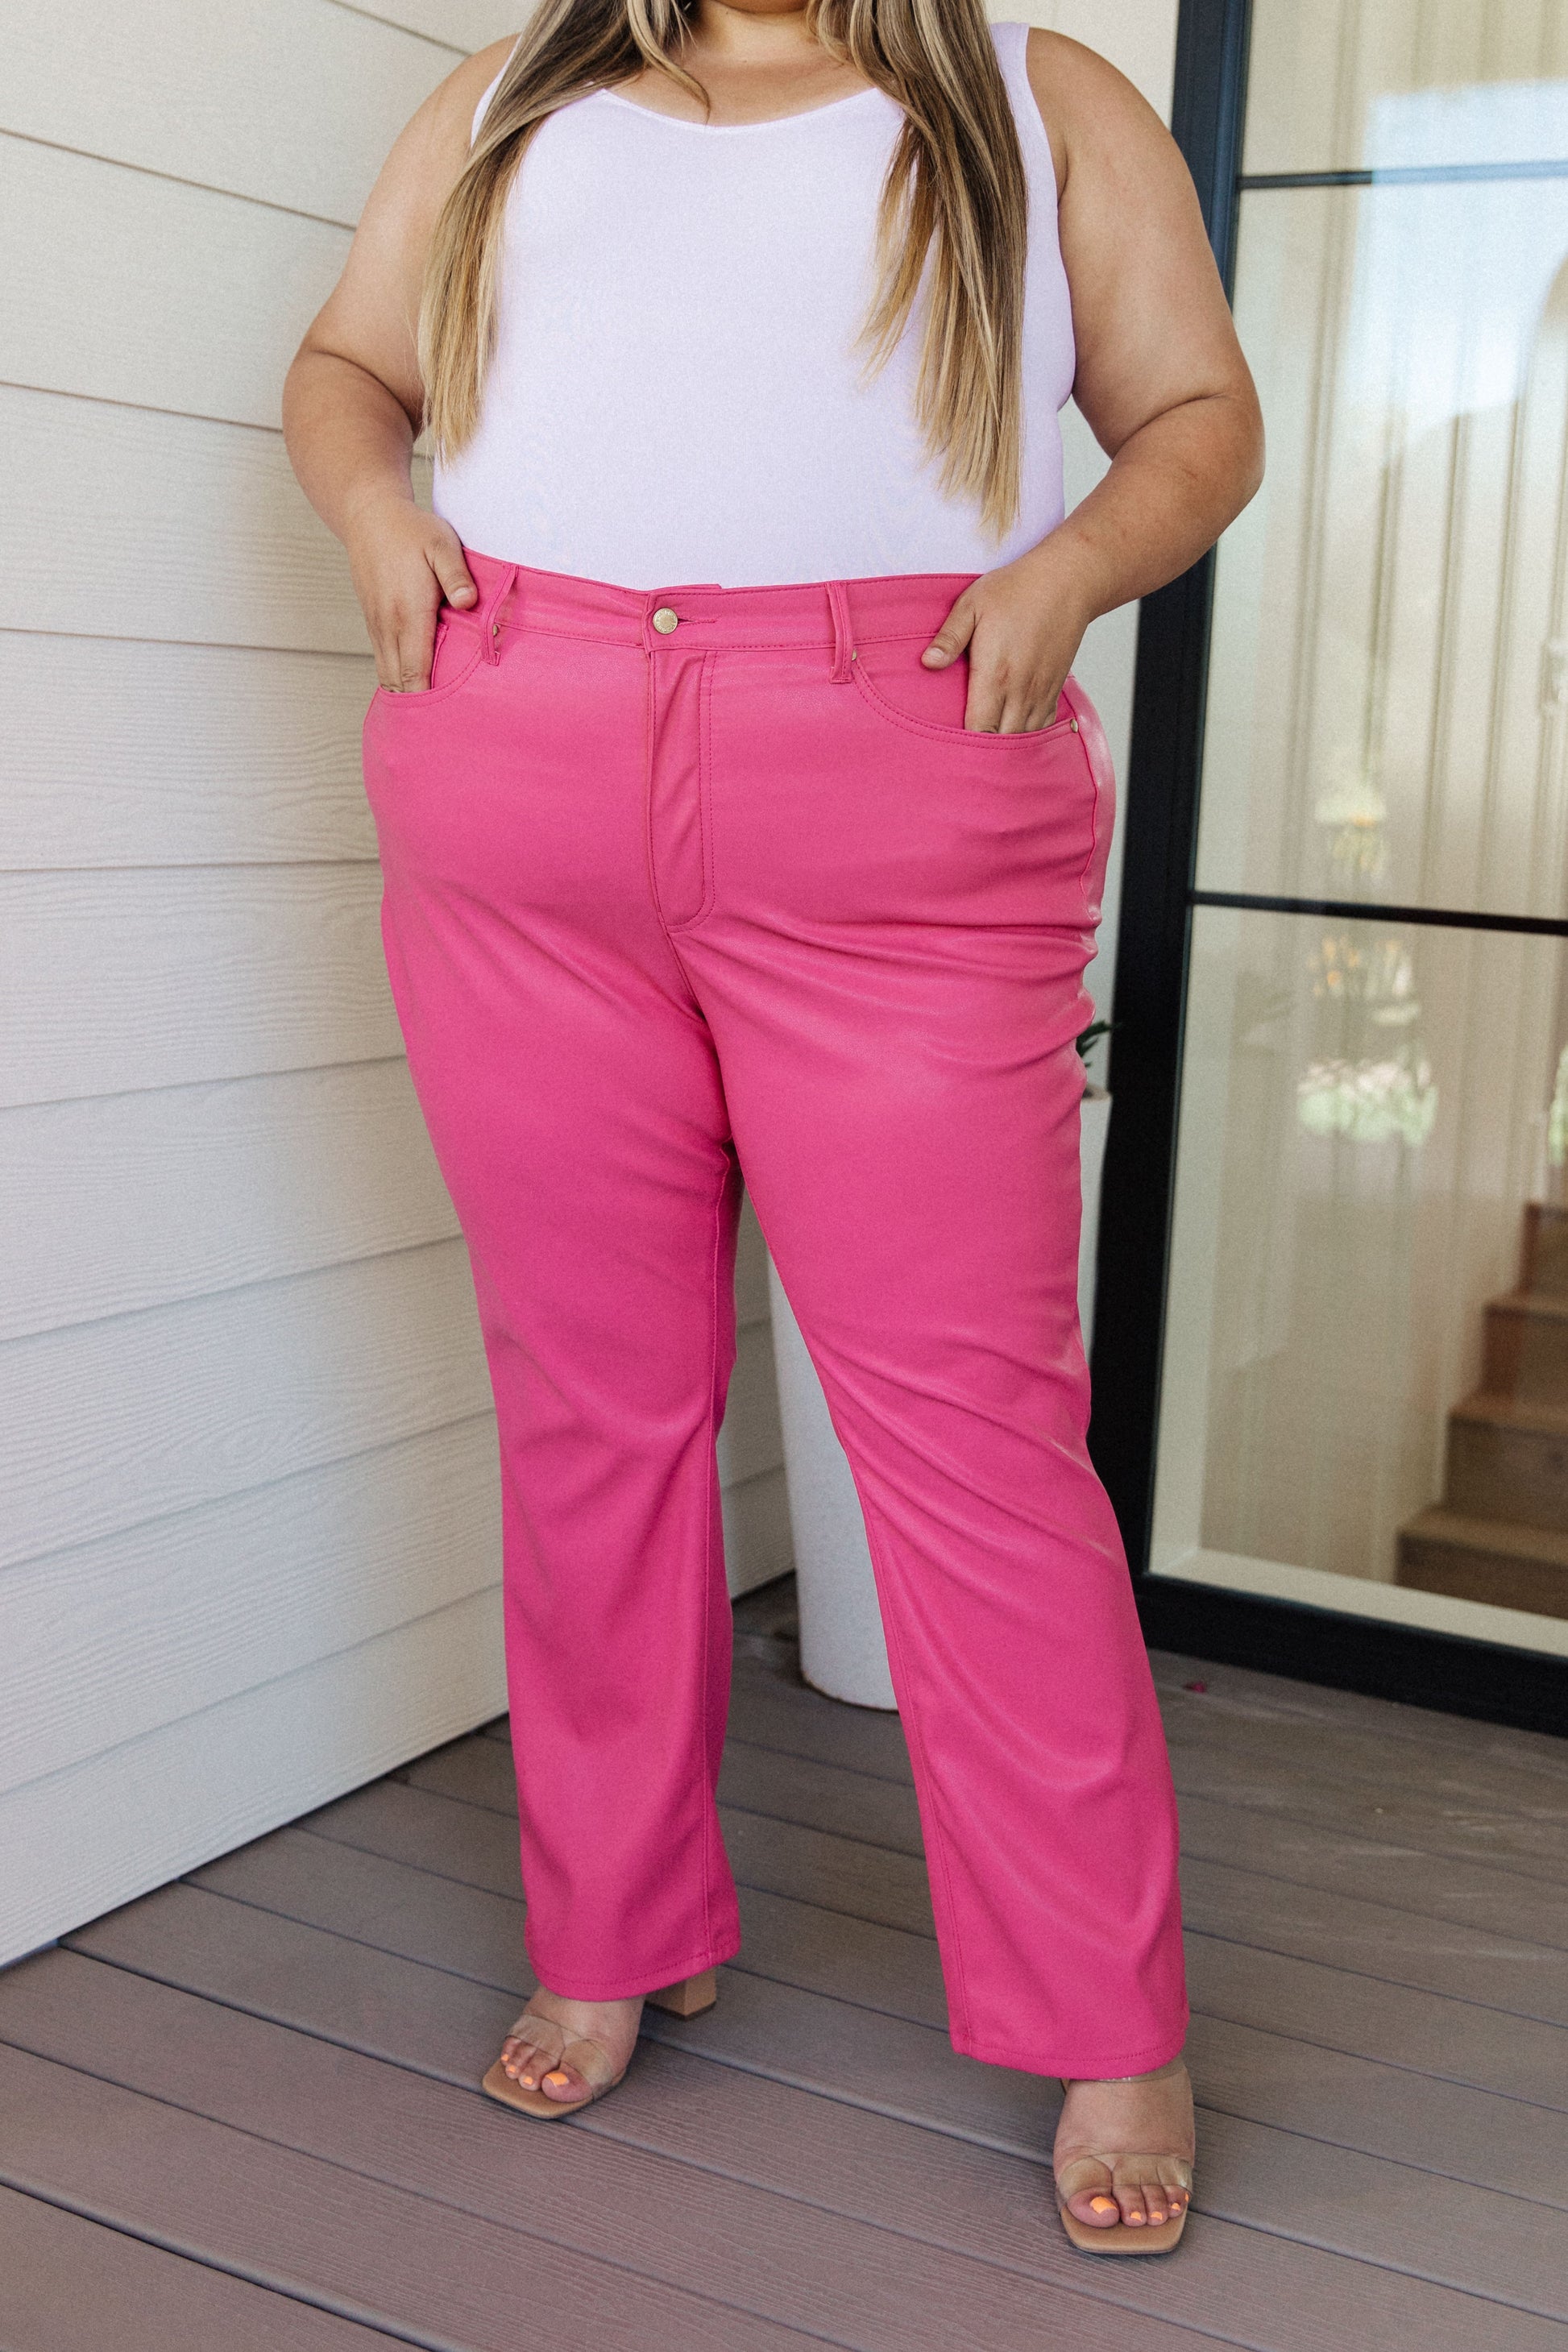 Break the rules with our Tanya Control Top Faux Leather Pants from Judy Blue! These high-waisted pants feature tummy control tech to keep you looking sleek, and a fun straight leg fit for timeless style. Dare to be bold and add a bold pop of color to your wardrobe! 0 -24W